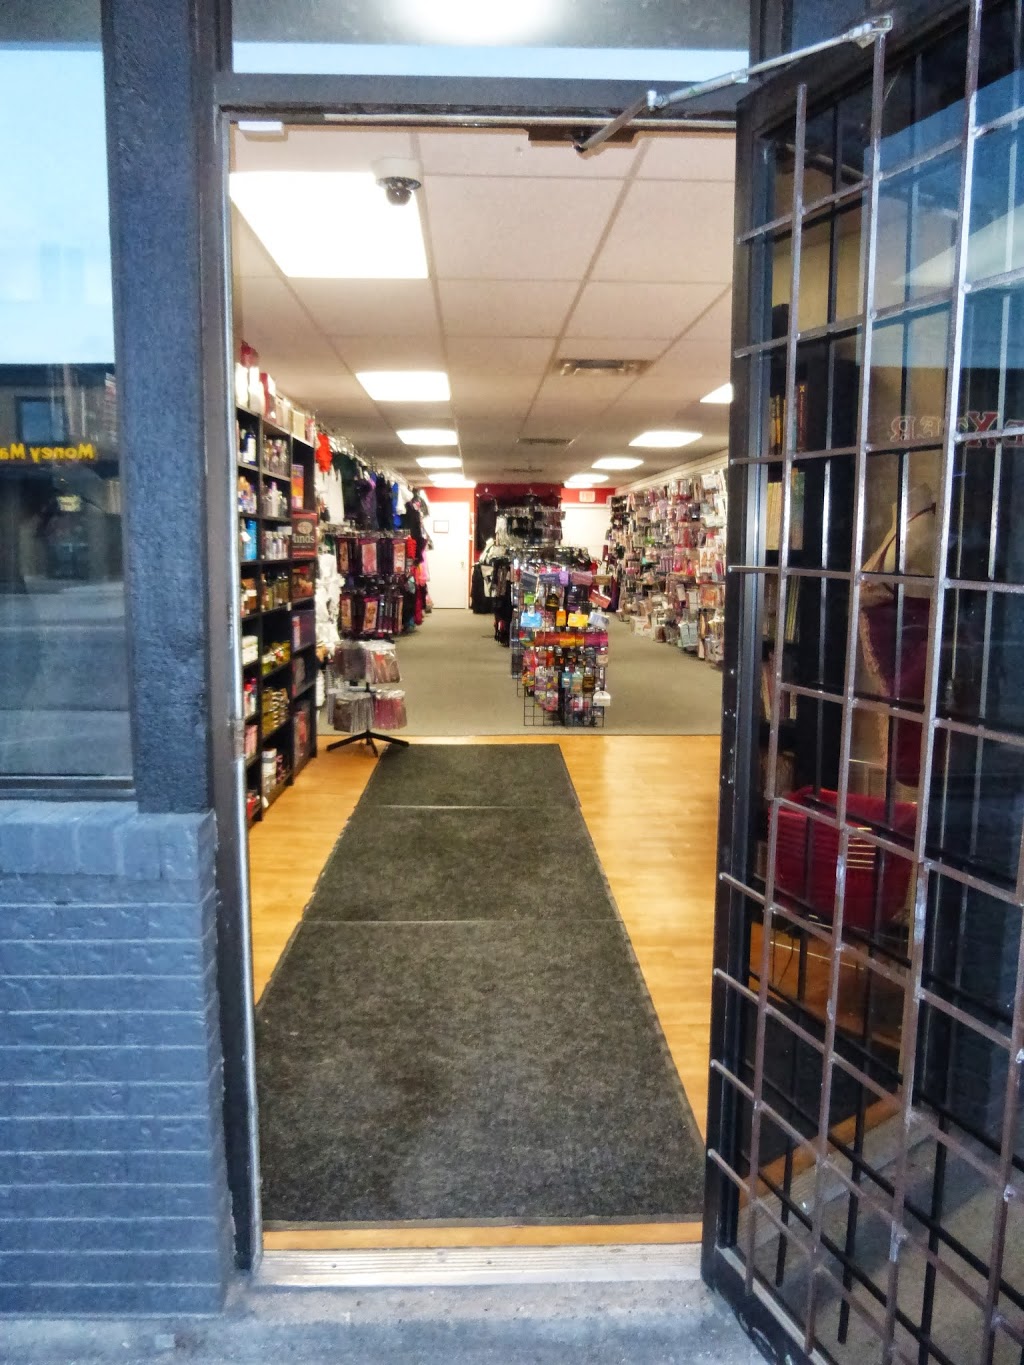 Little Shop Of Pleasures - Bowness | 6411 Bowness Rd NW, Calgary, AB T3B 0E6, Canada | Phone: (403) 247-3103